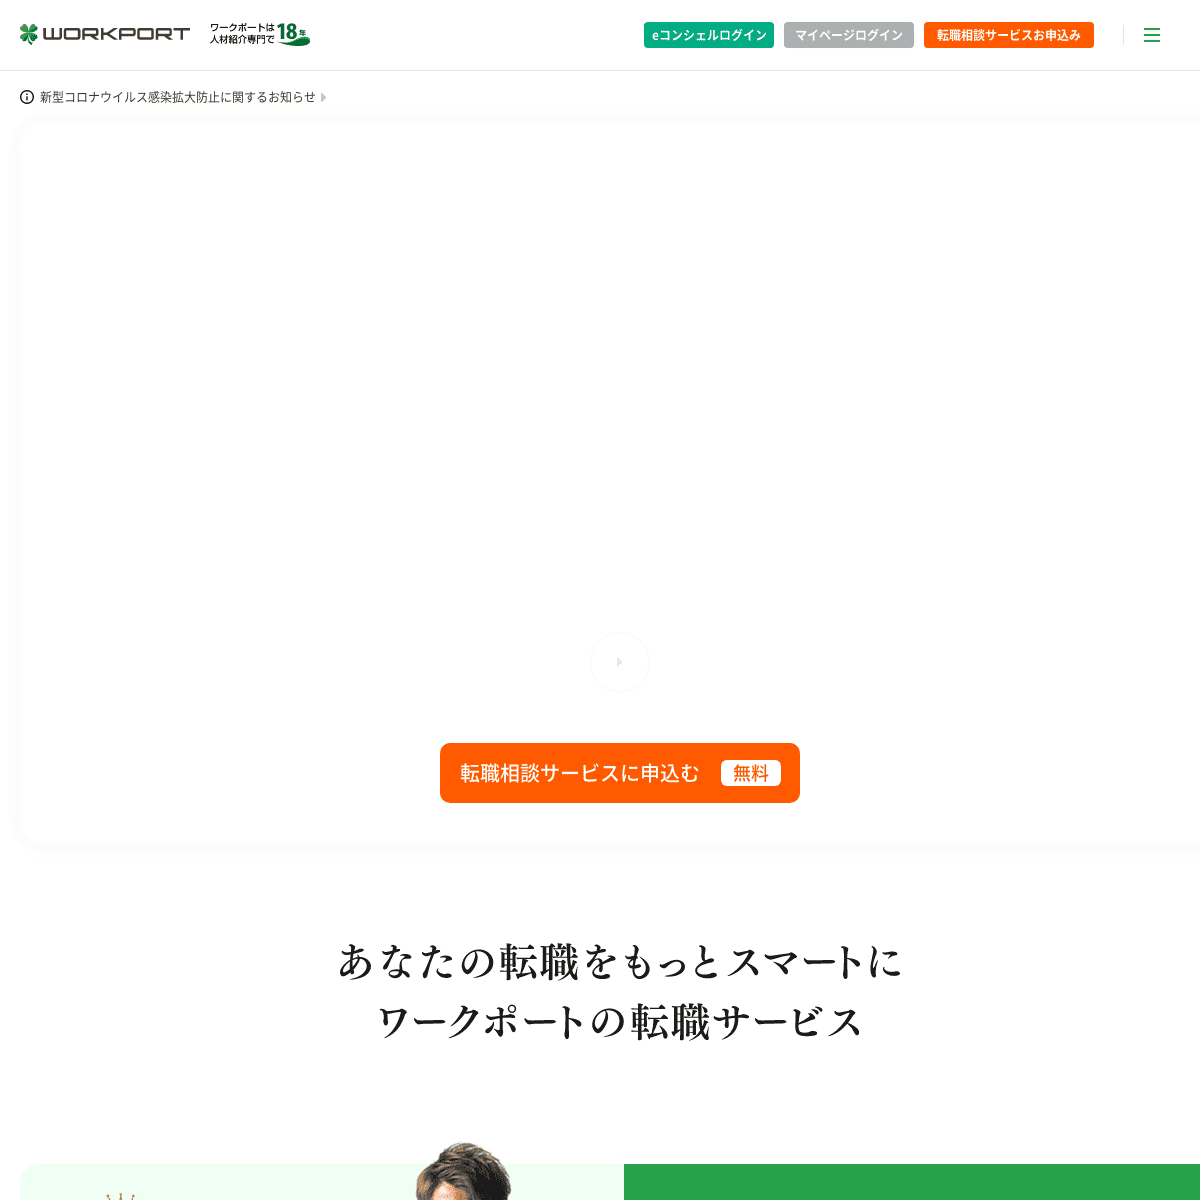 A complete backup of https://workport.co.jp